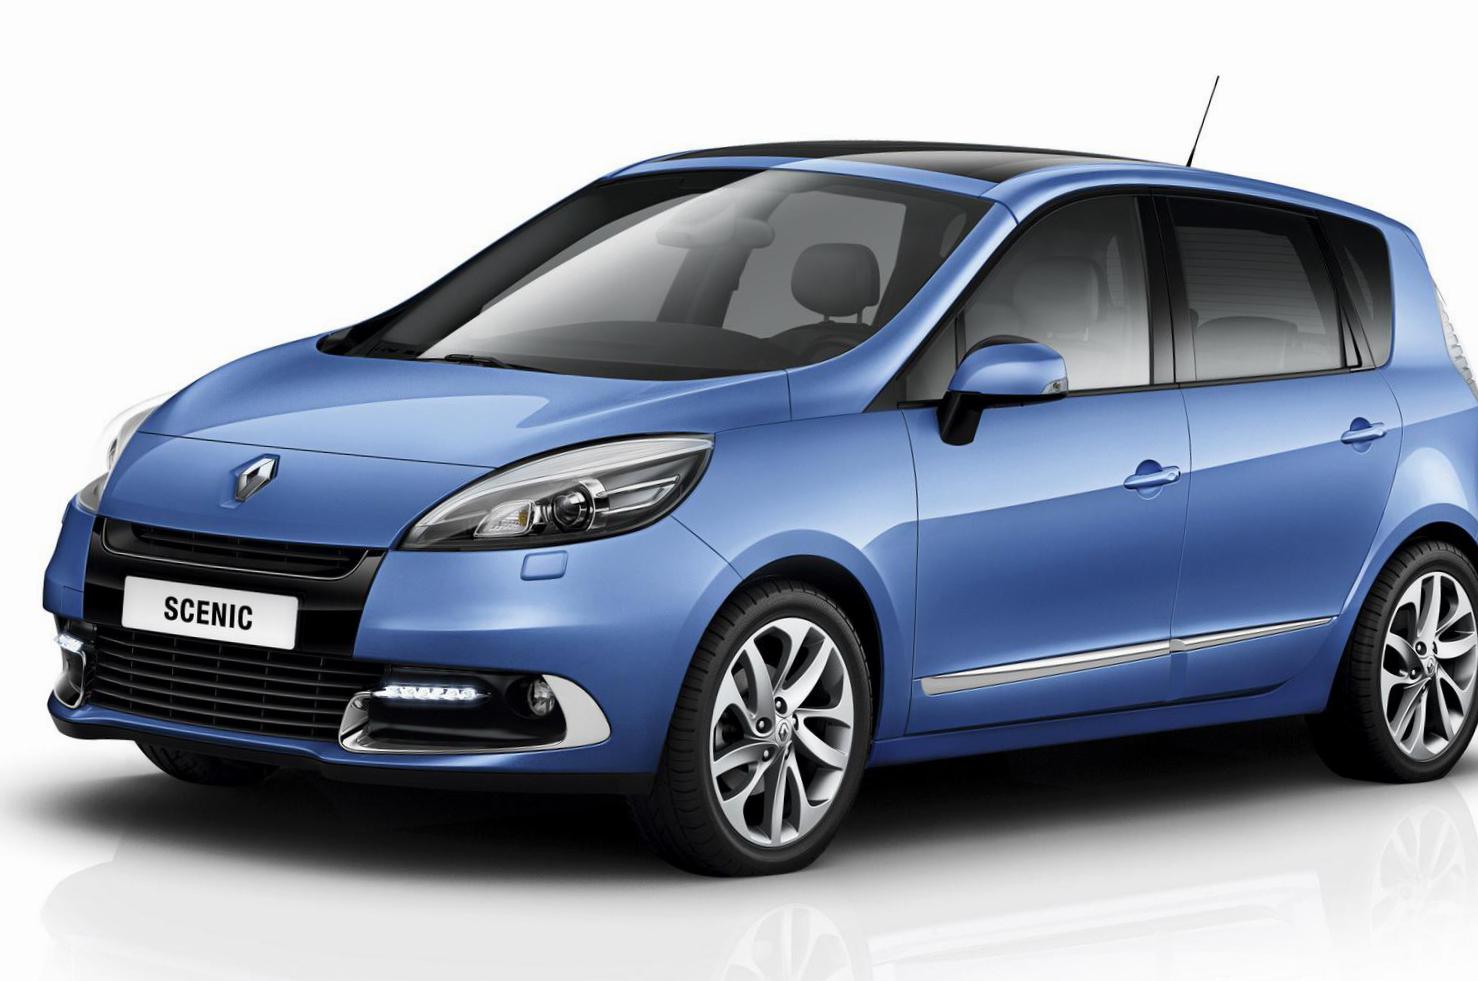 Renault Scenic Specification 2010